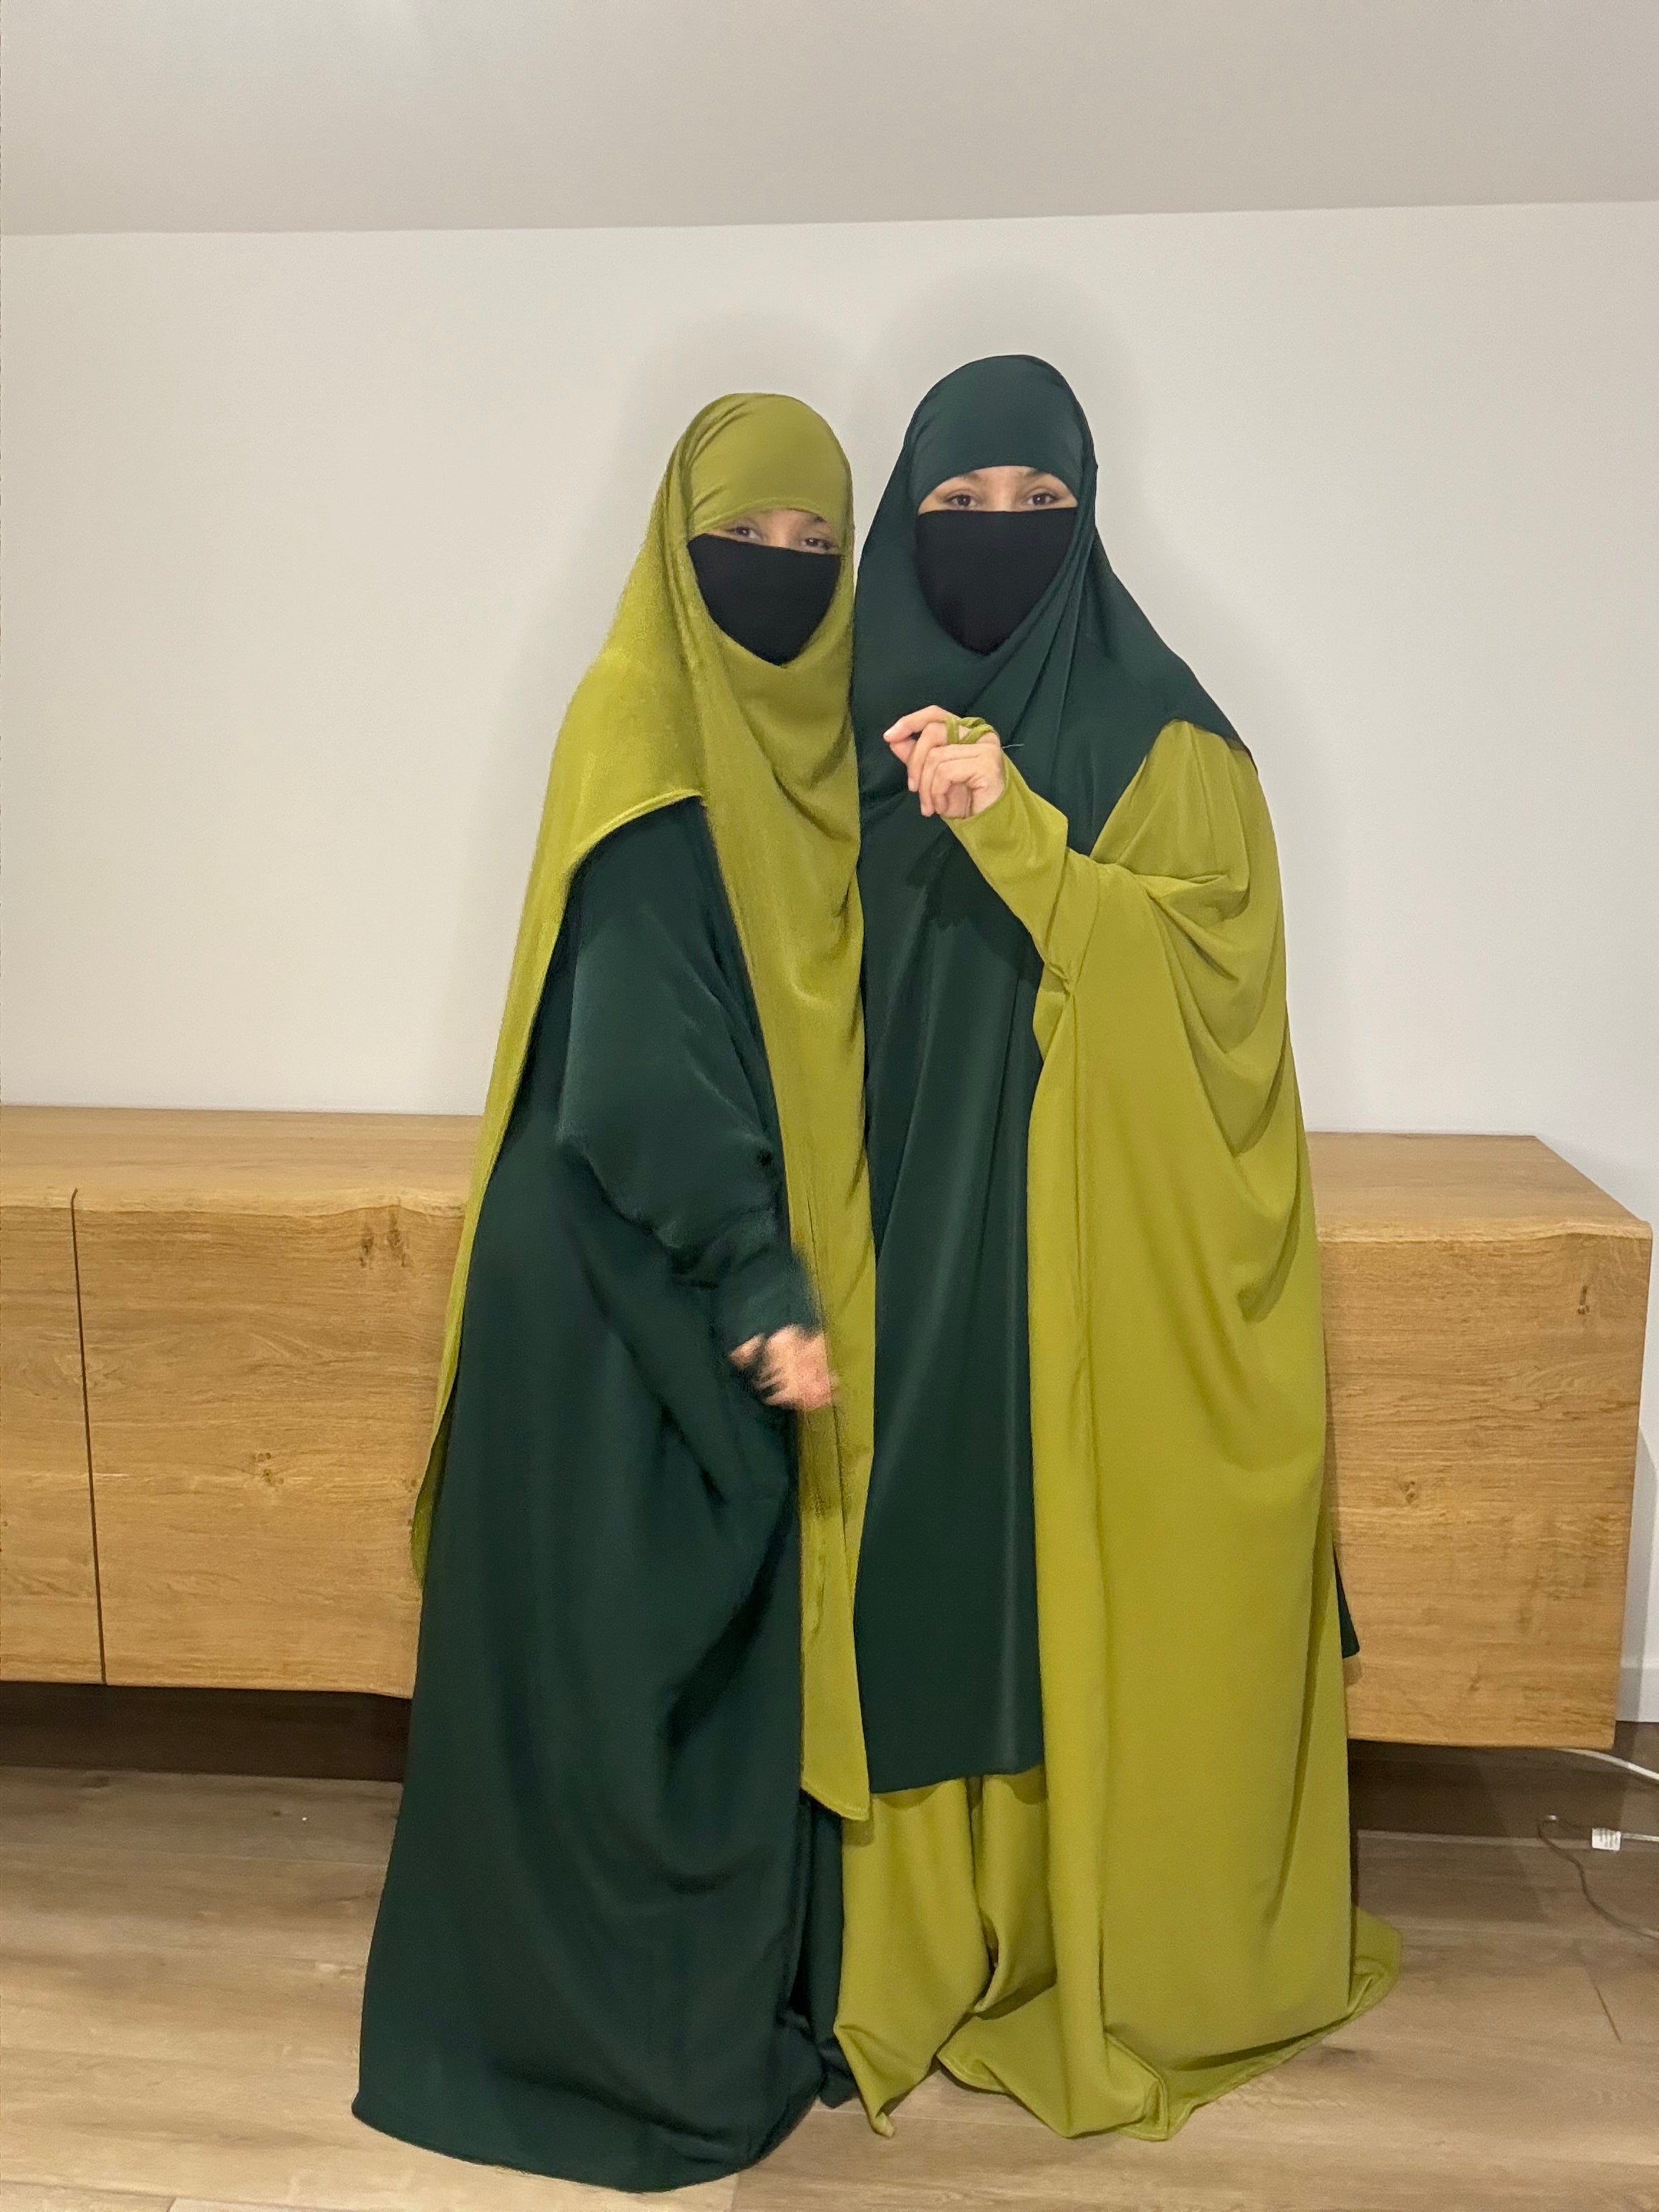 Al Maamari Tours on X: The Omani🇴🇲 burqa is worn as protection from the  harsh desert🏜 climate to keep hot sand and dust out of the nose and mouth  and it also